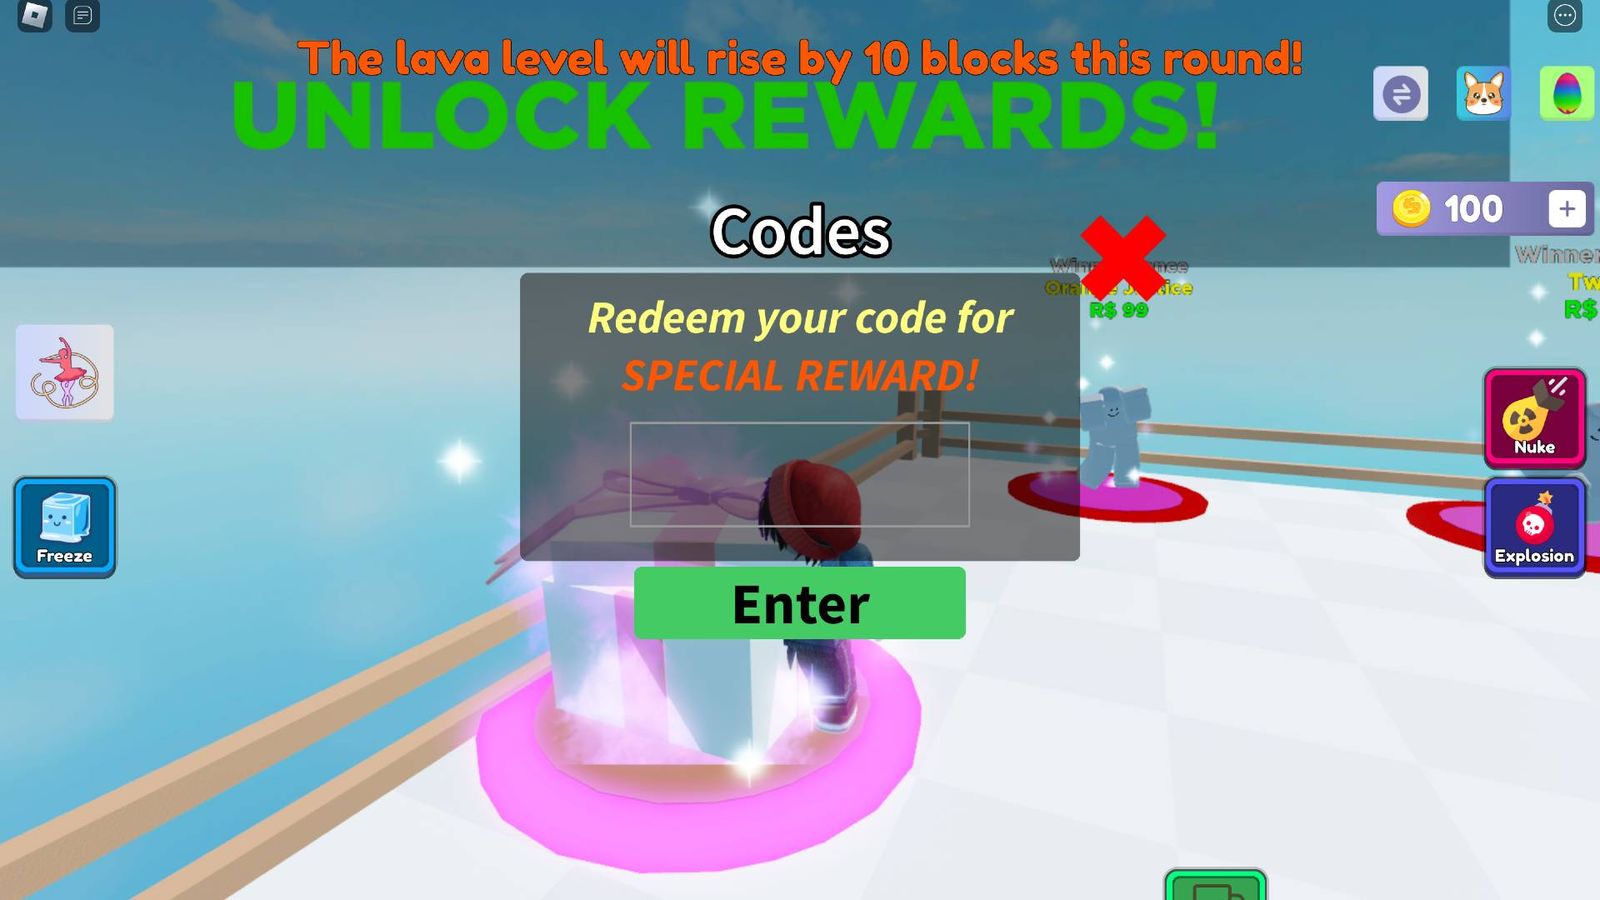 The code redemption screen in Math Answer or Die.